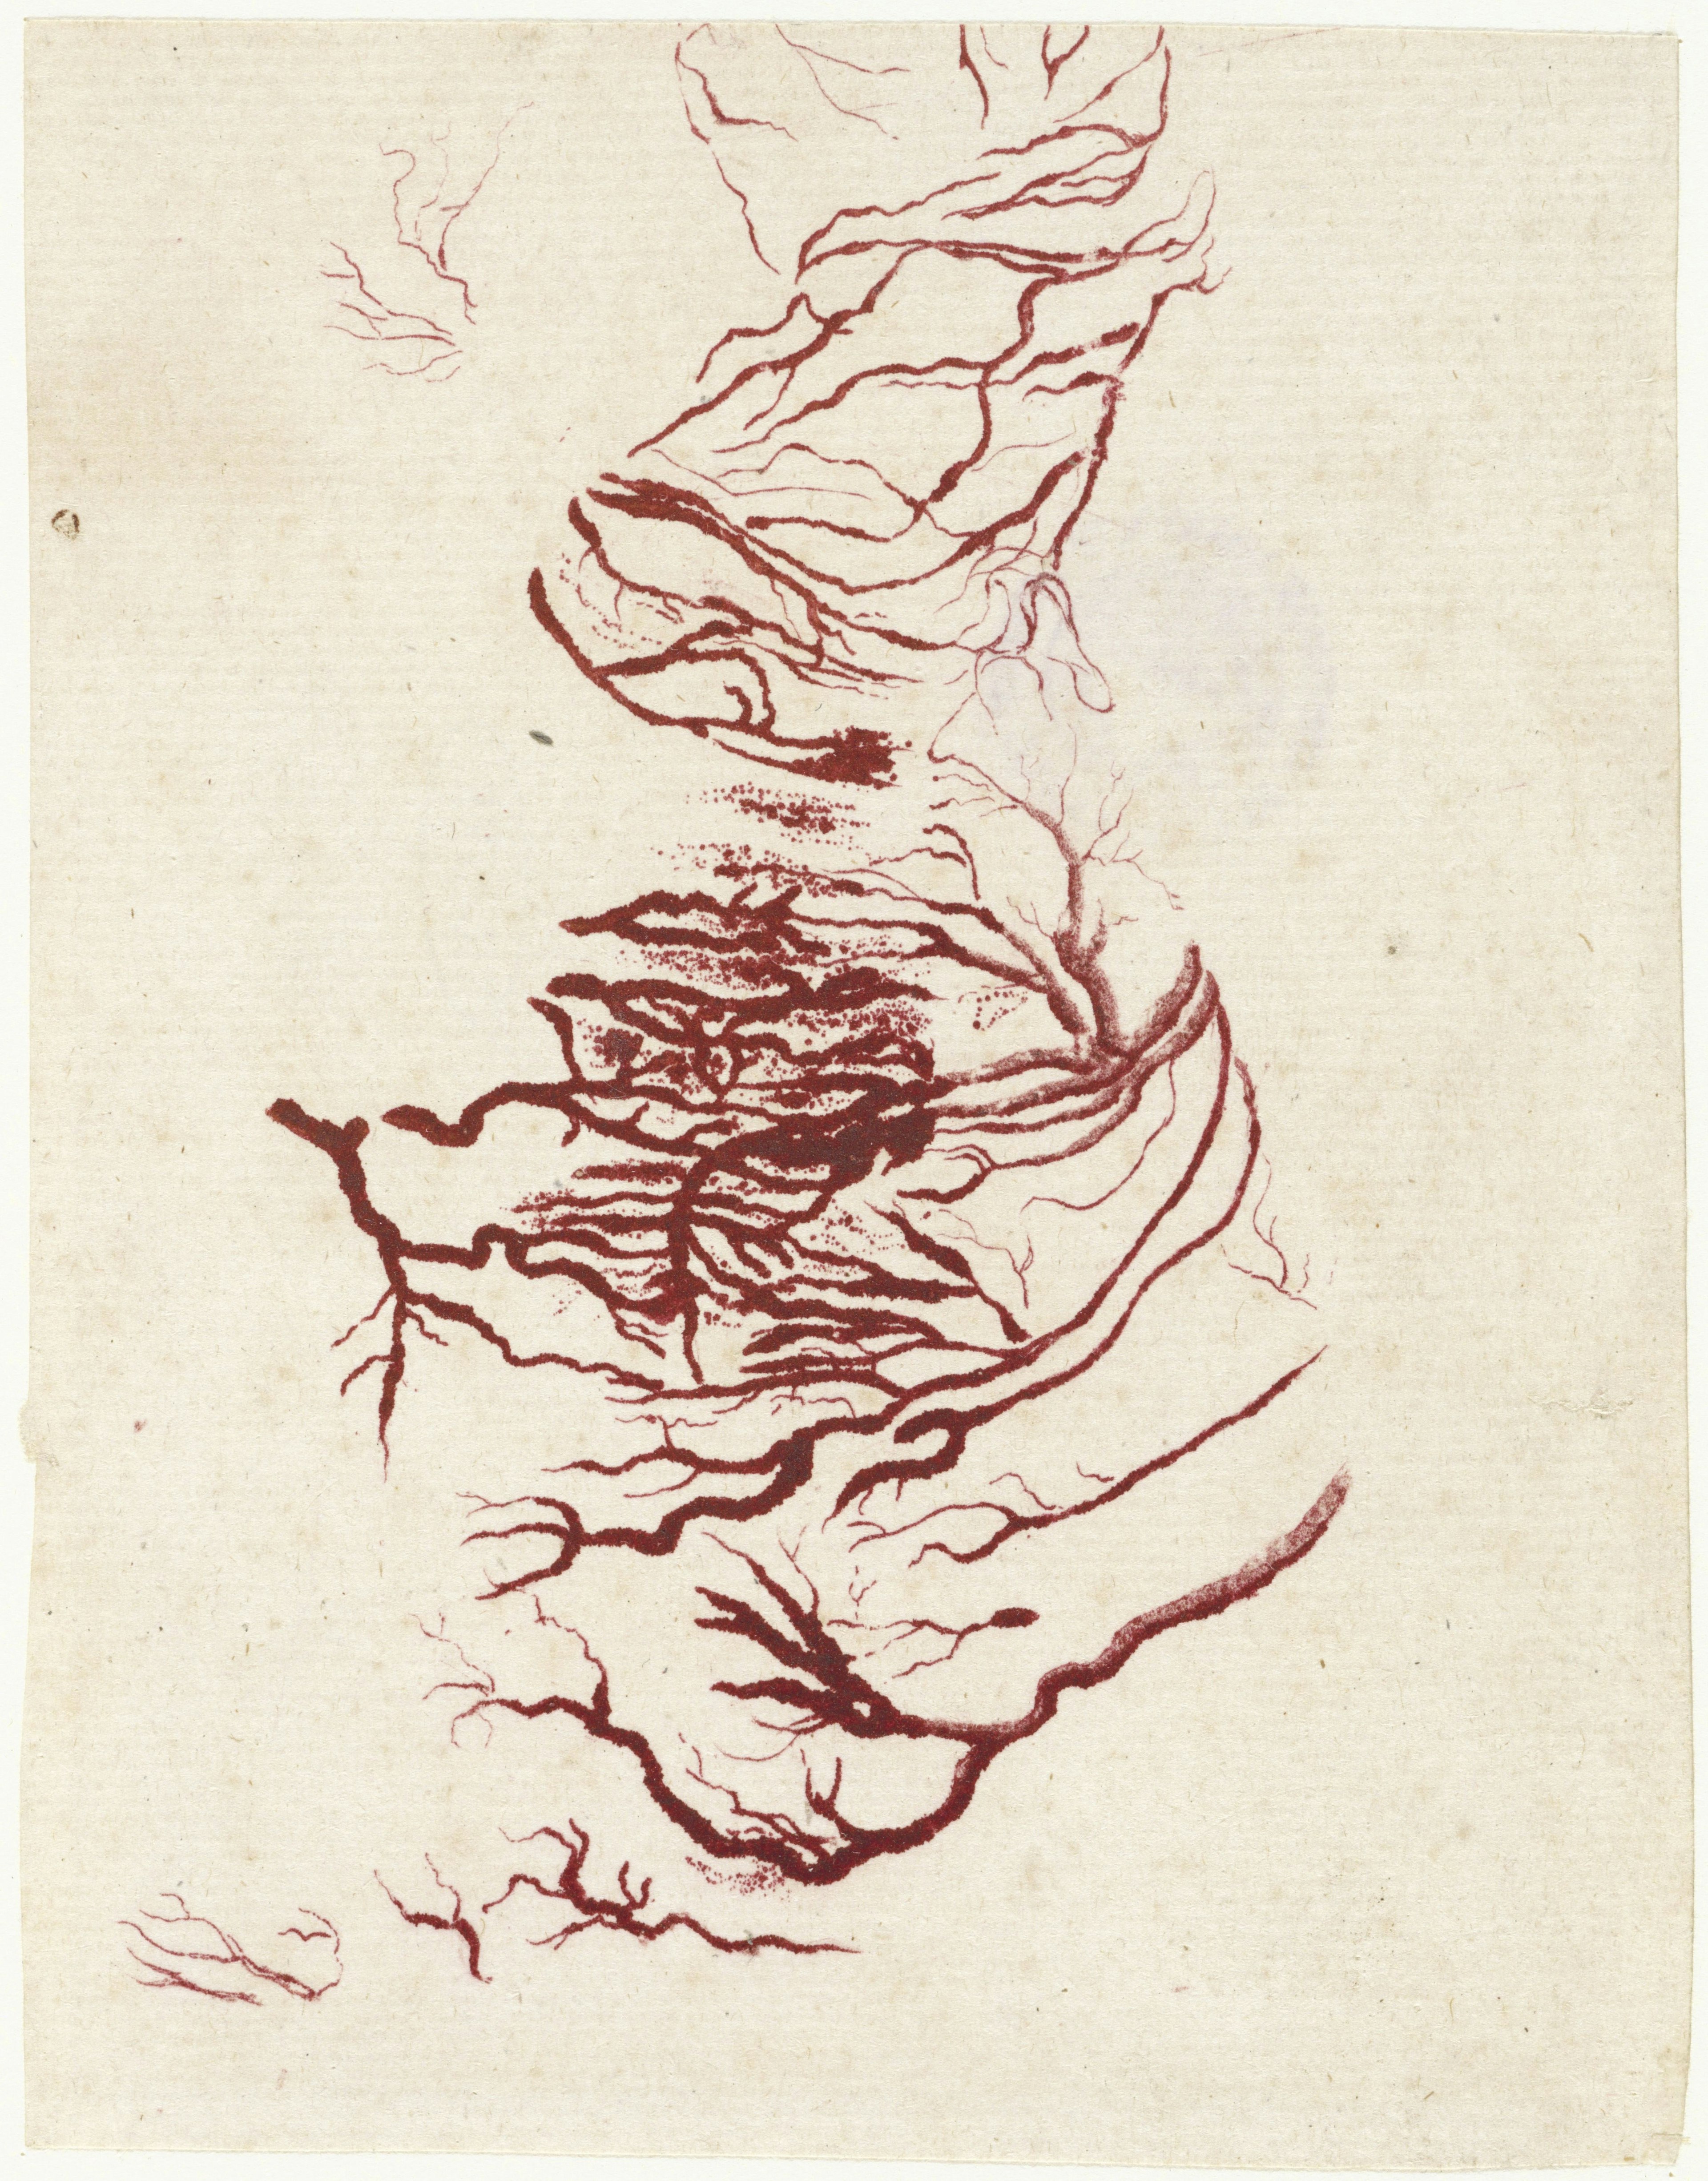 A drawing of the blood vessels of the heart.